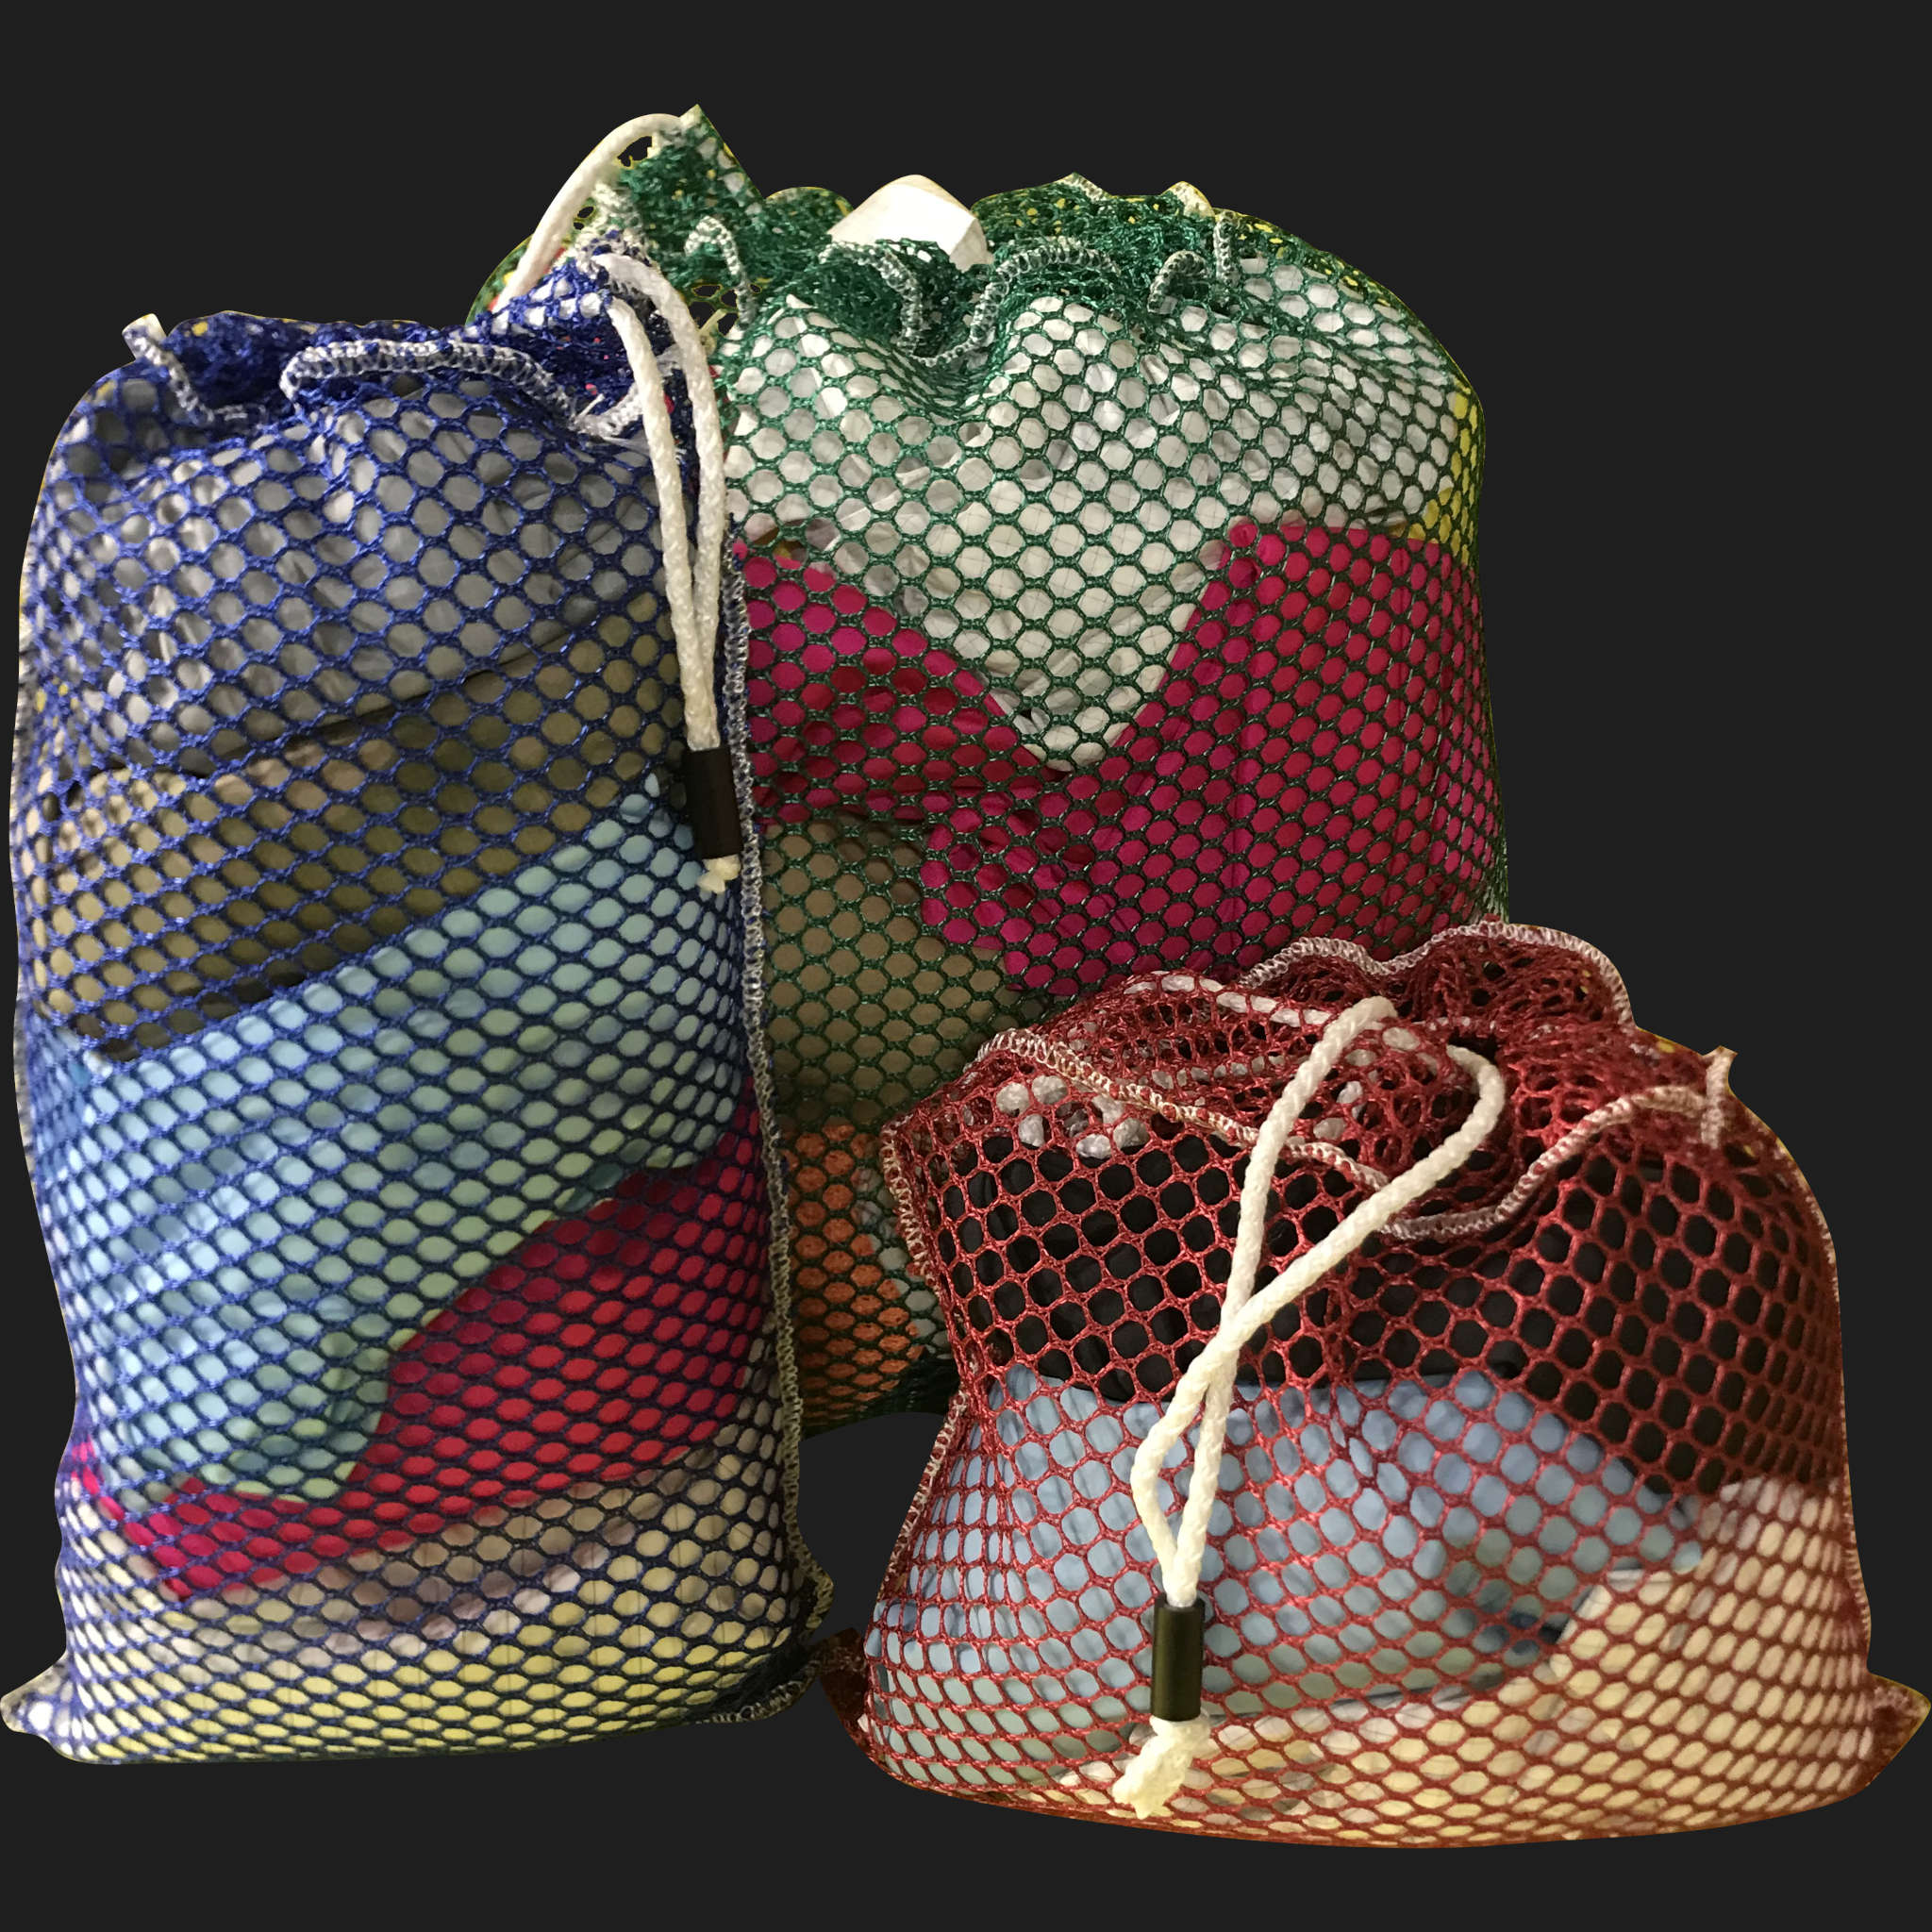 40" x 64" Customized Mesh-Net-Laundry Bags Heavy Duty with Cord and barrellock closure